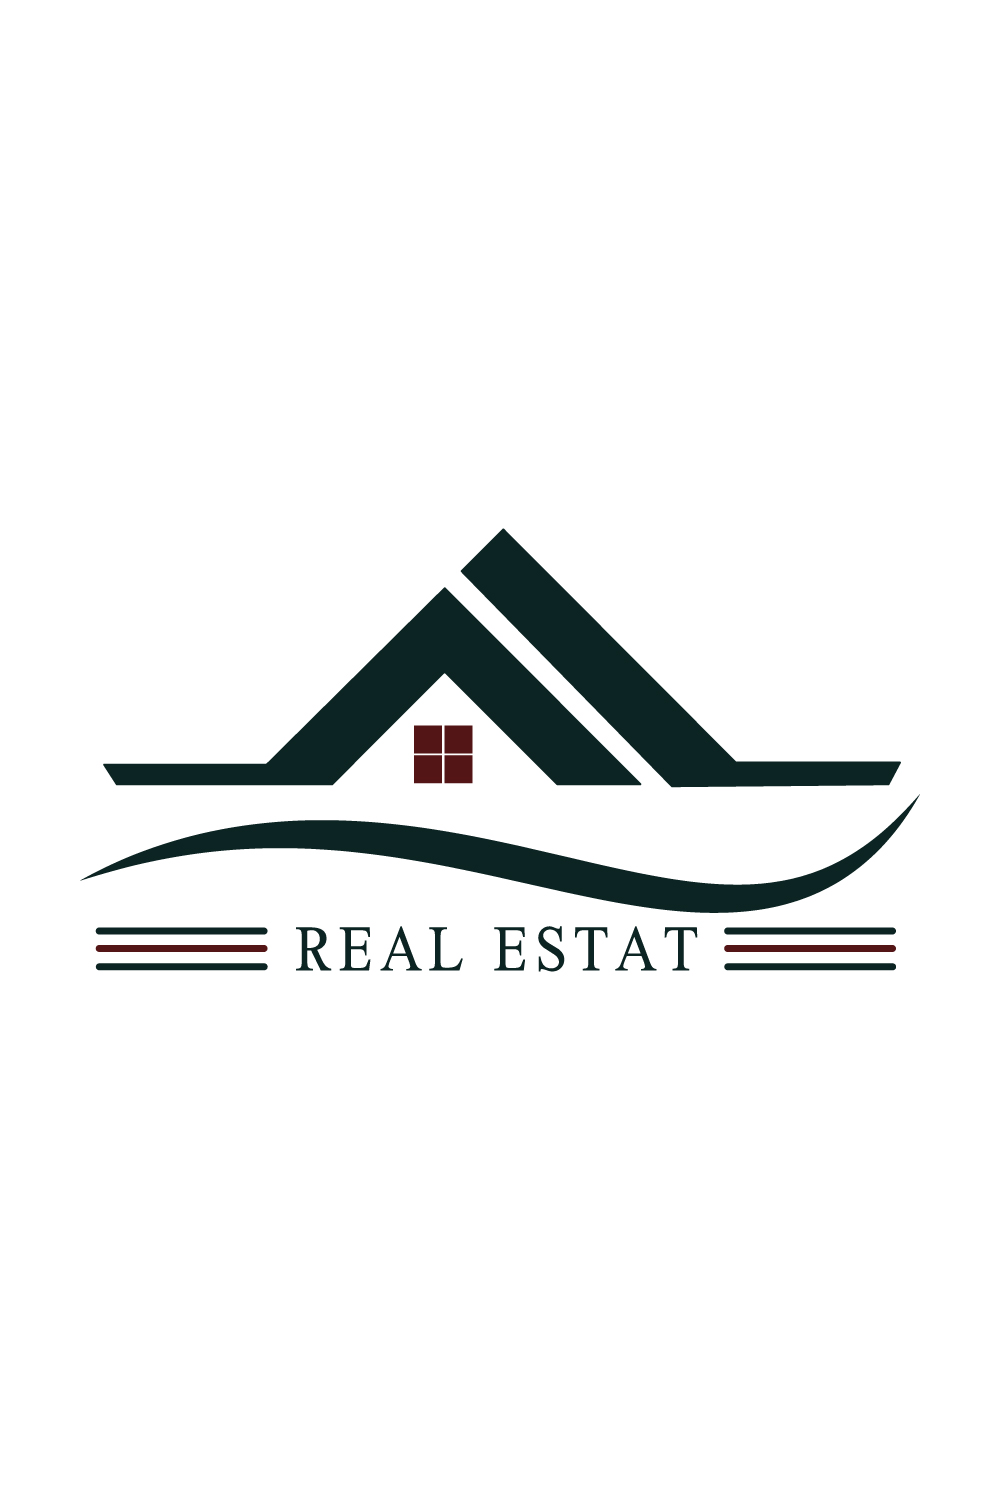 Luxury Real Estate logo design vector images Home House logo design template arts Stay House logo design best company identity pinterest preview image.